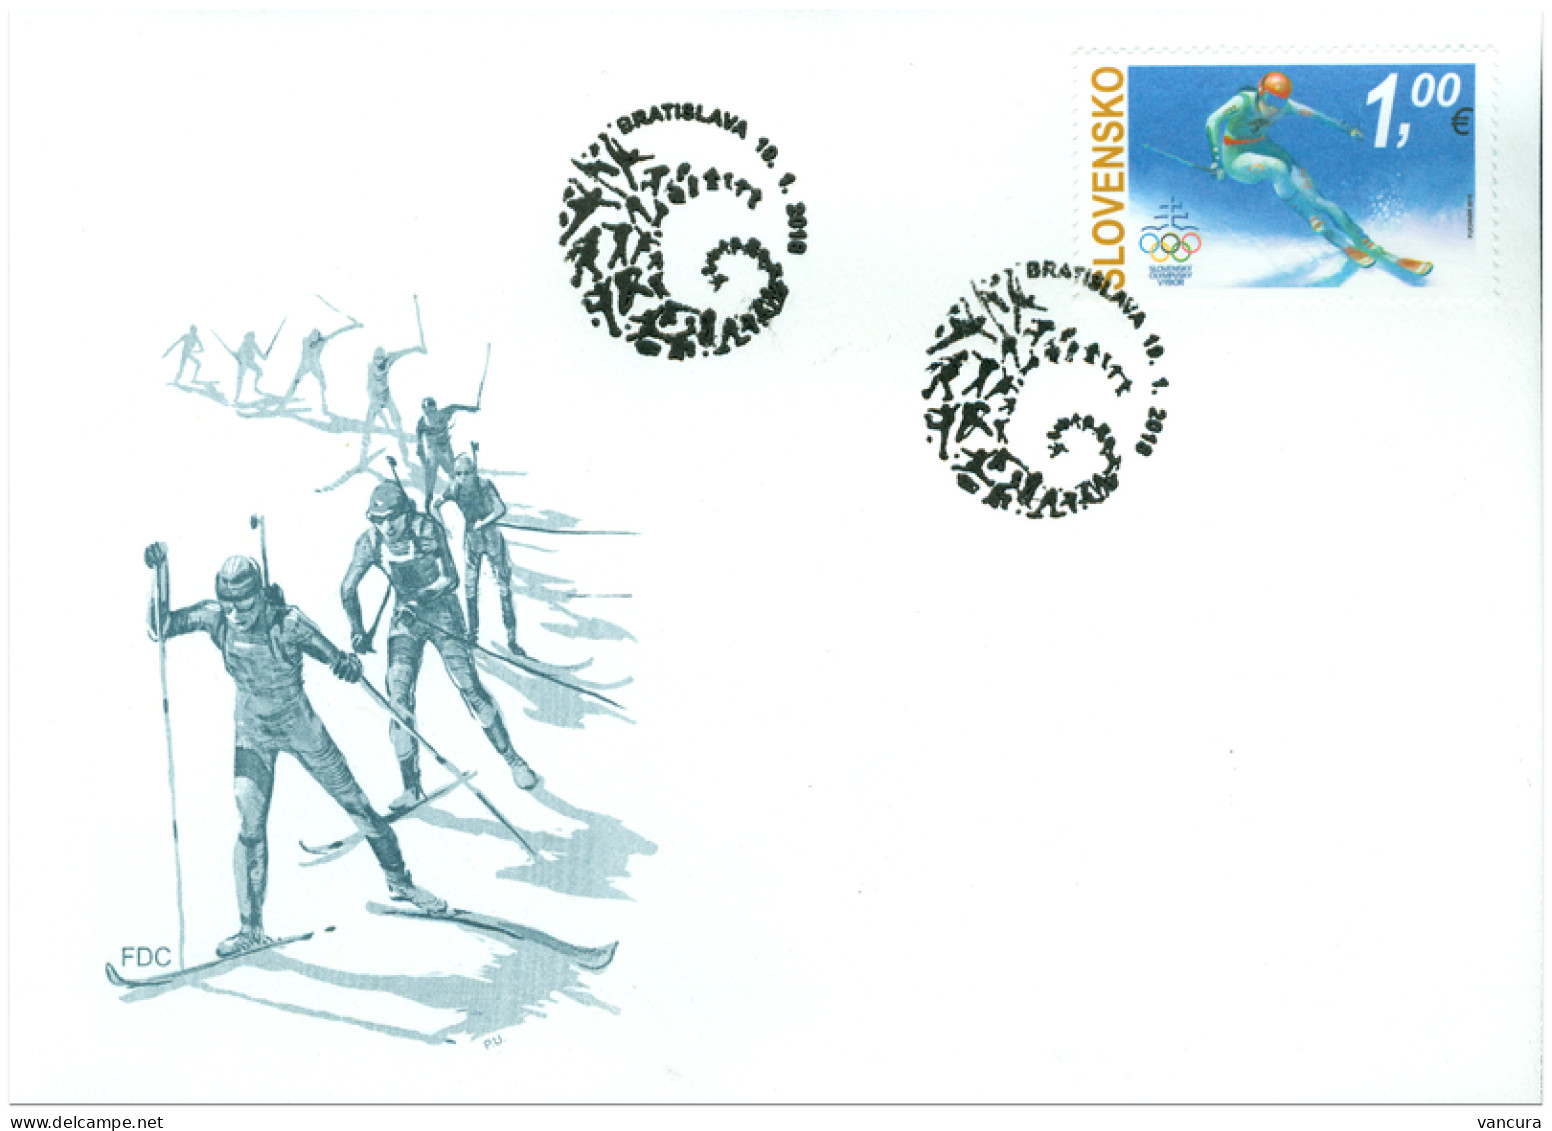 FDC 653 And 655 Slovakia. Winter Olympic Games Pyeongchang And Paralympic Games 2018 - Hiver 2018 : Pyeongchang